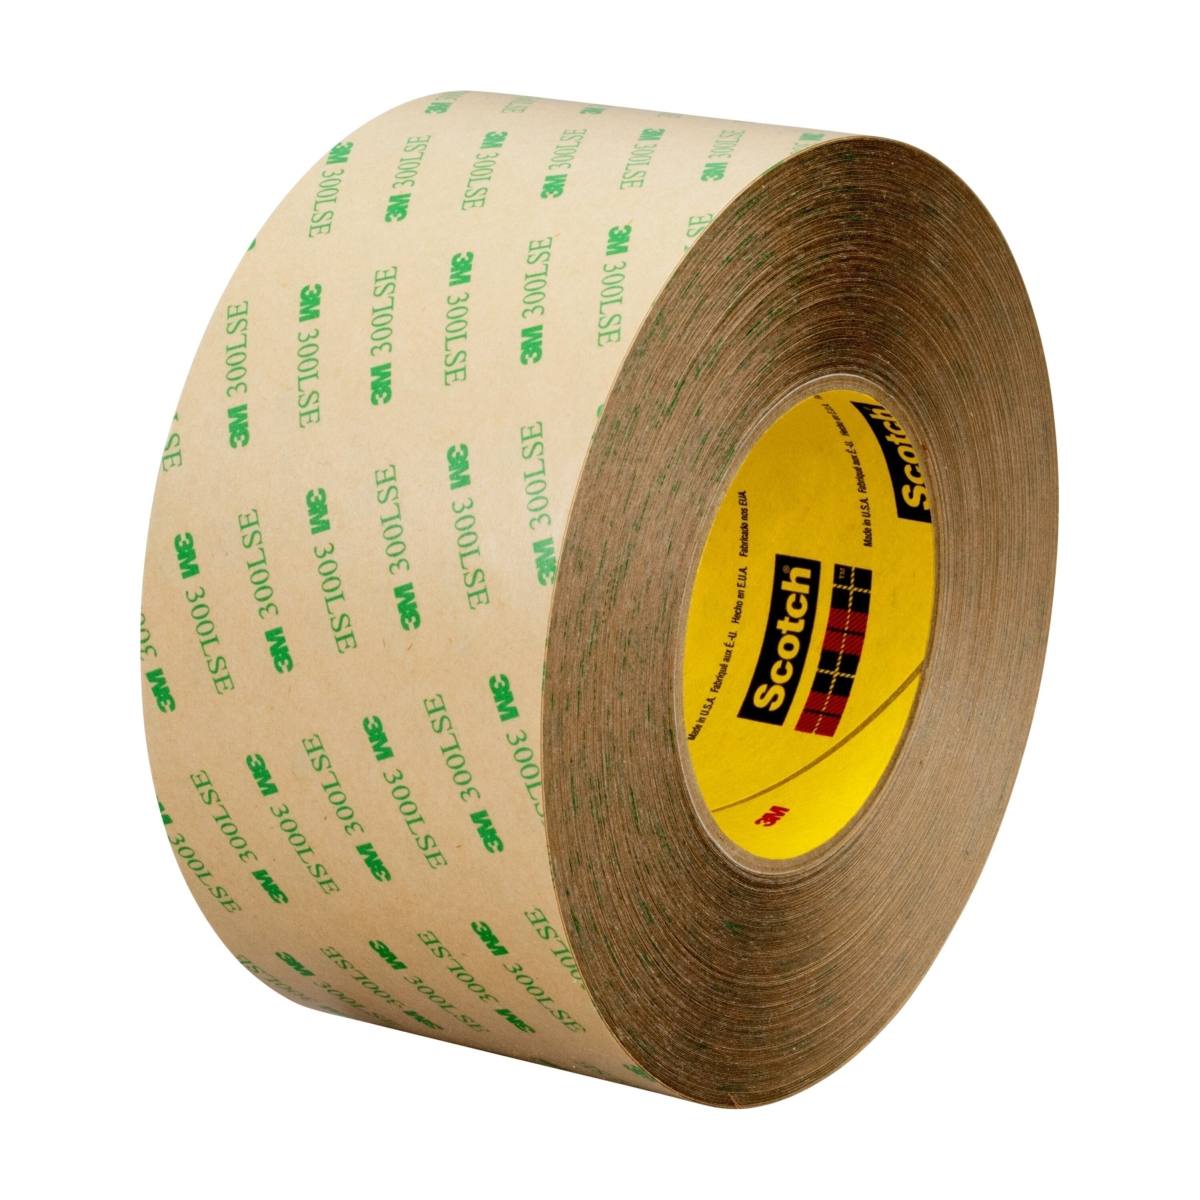 3M Dubbelzijdig plakband met polyester drager 93015LE, transparant, 50 mm x 55 m, 0,15 mm